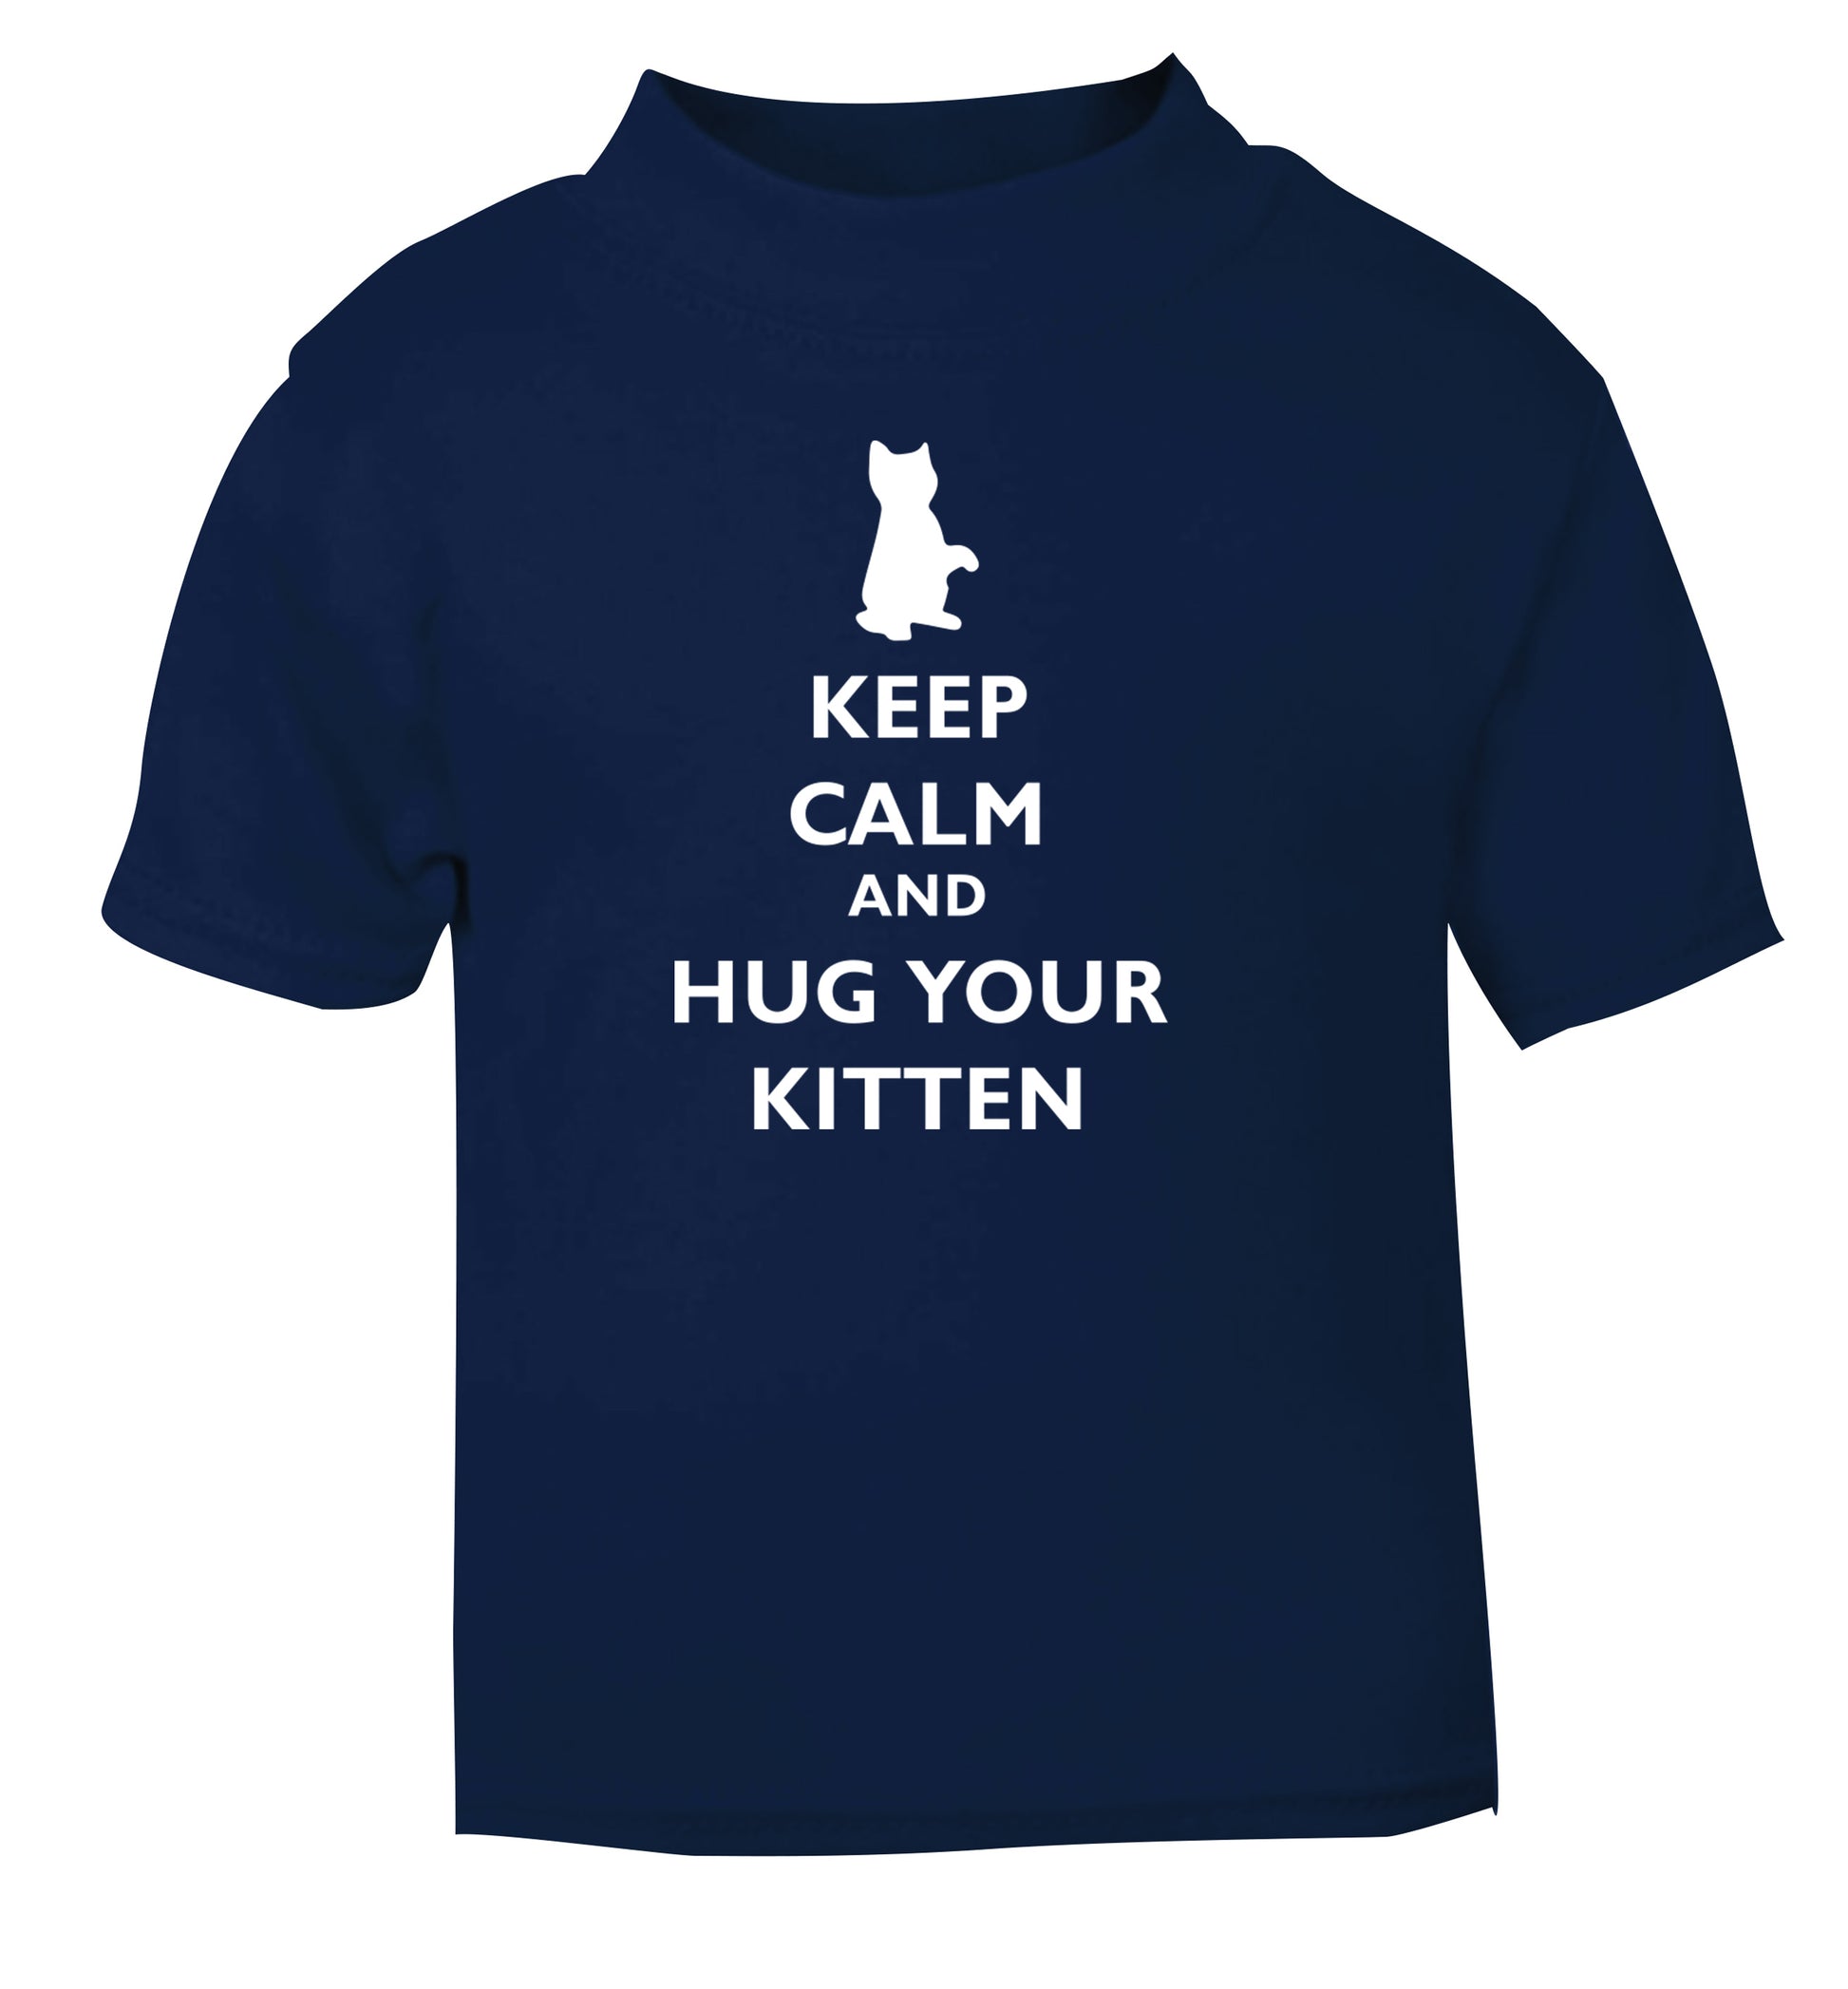 Keep calm and hug your kitten navy Baby Toddler Tshirt 2 Years